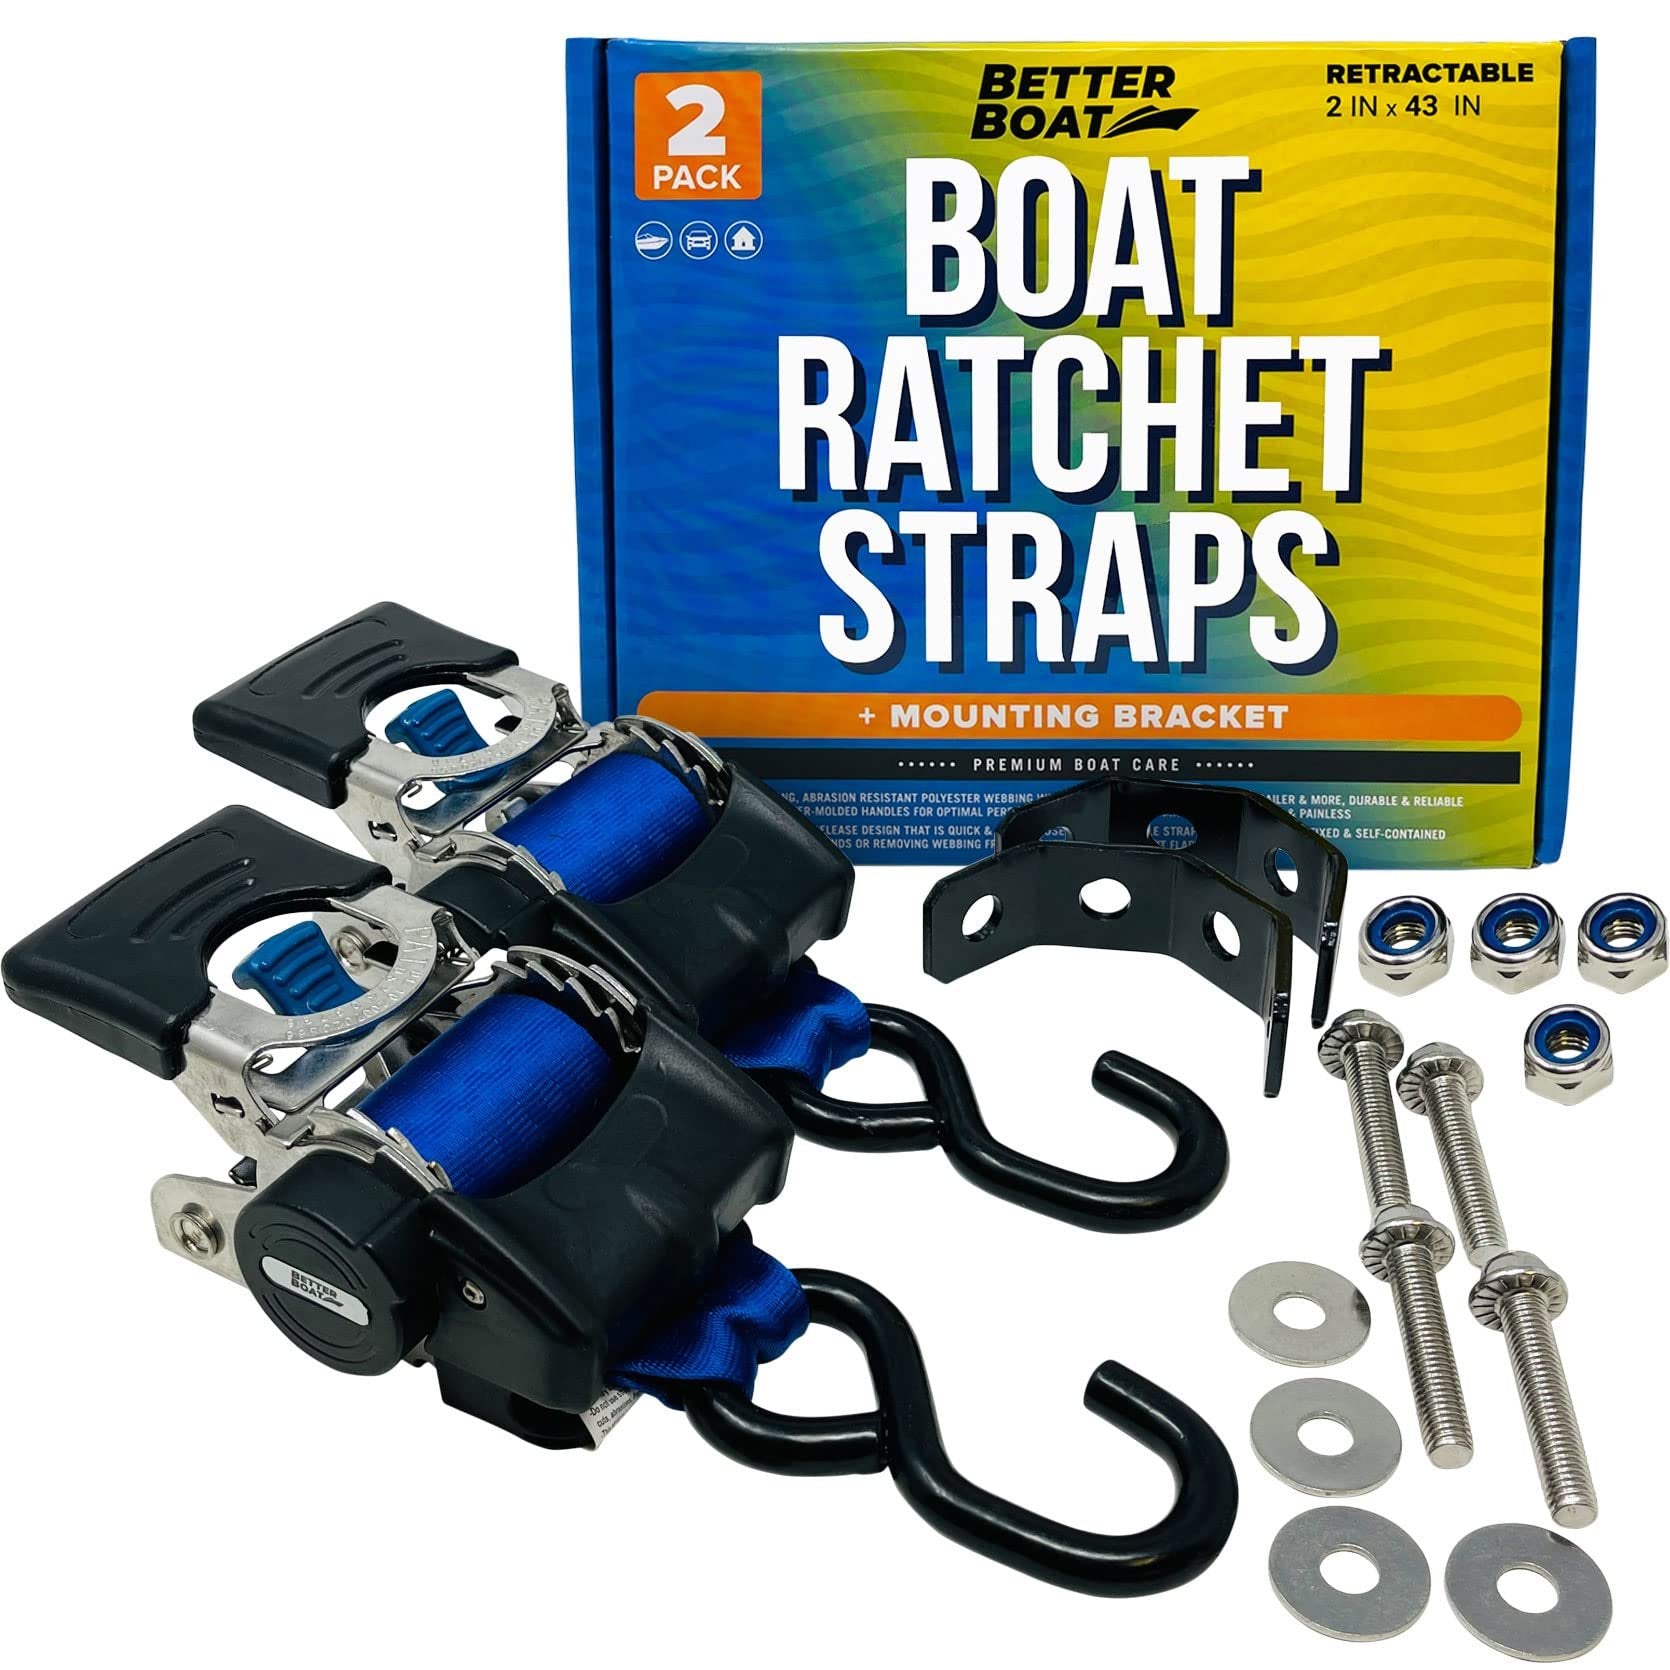 2x43 Blue Stainless Retractable Ratchet Straps - Heavy Duty Set with Mounting Brackets & Bolts - Self-Retracting Buckle for Cargo